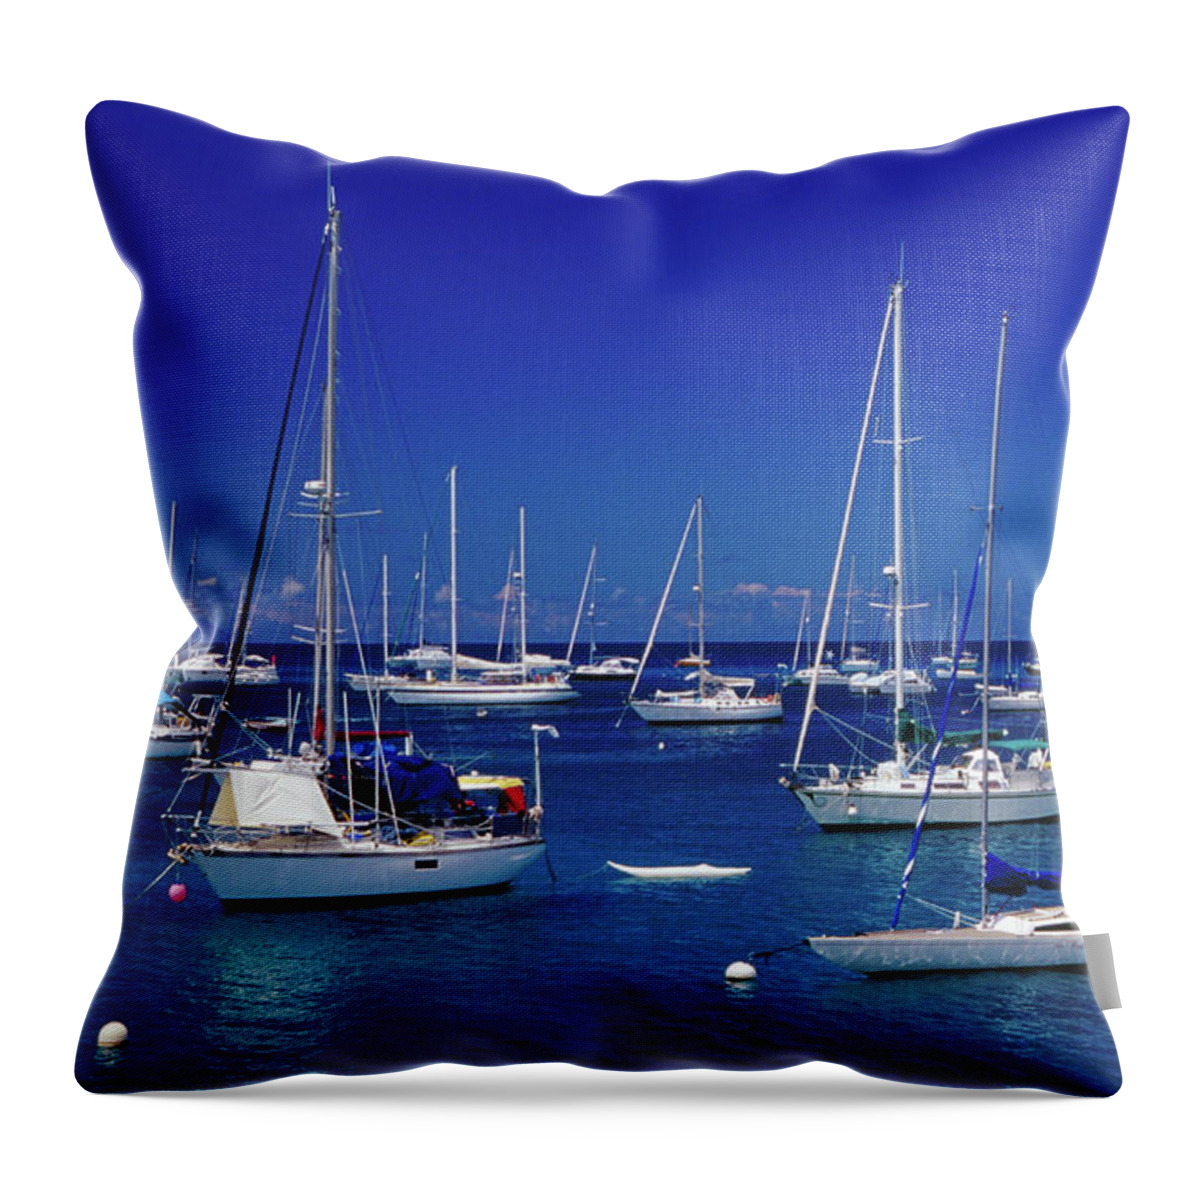 Tranquility Throw Pillow featuring the photograph Yachts Moored On The Caribbean Sea At by Richard I'anson